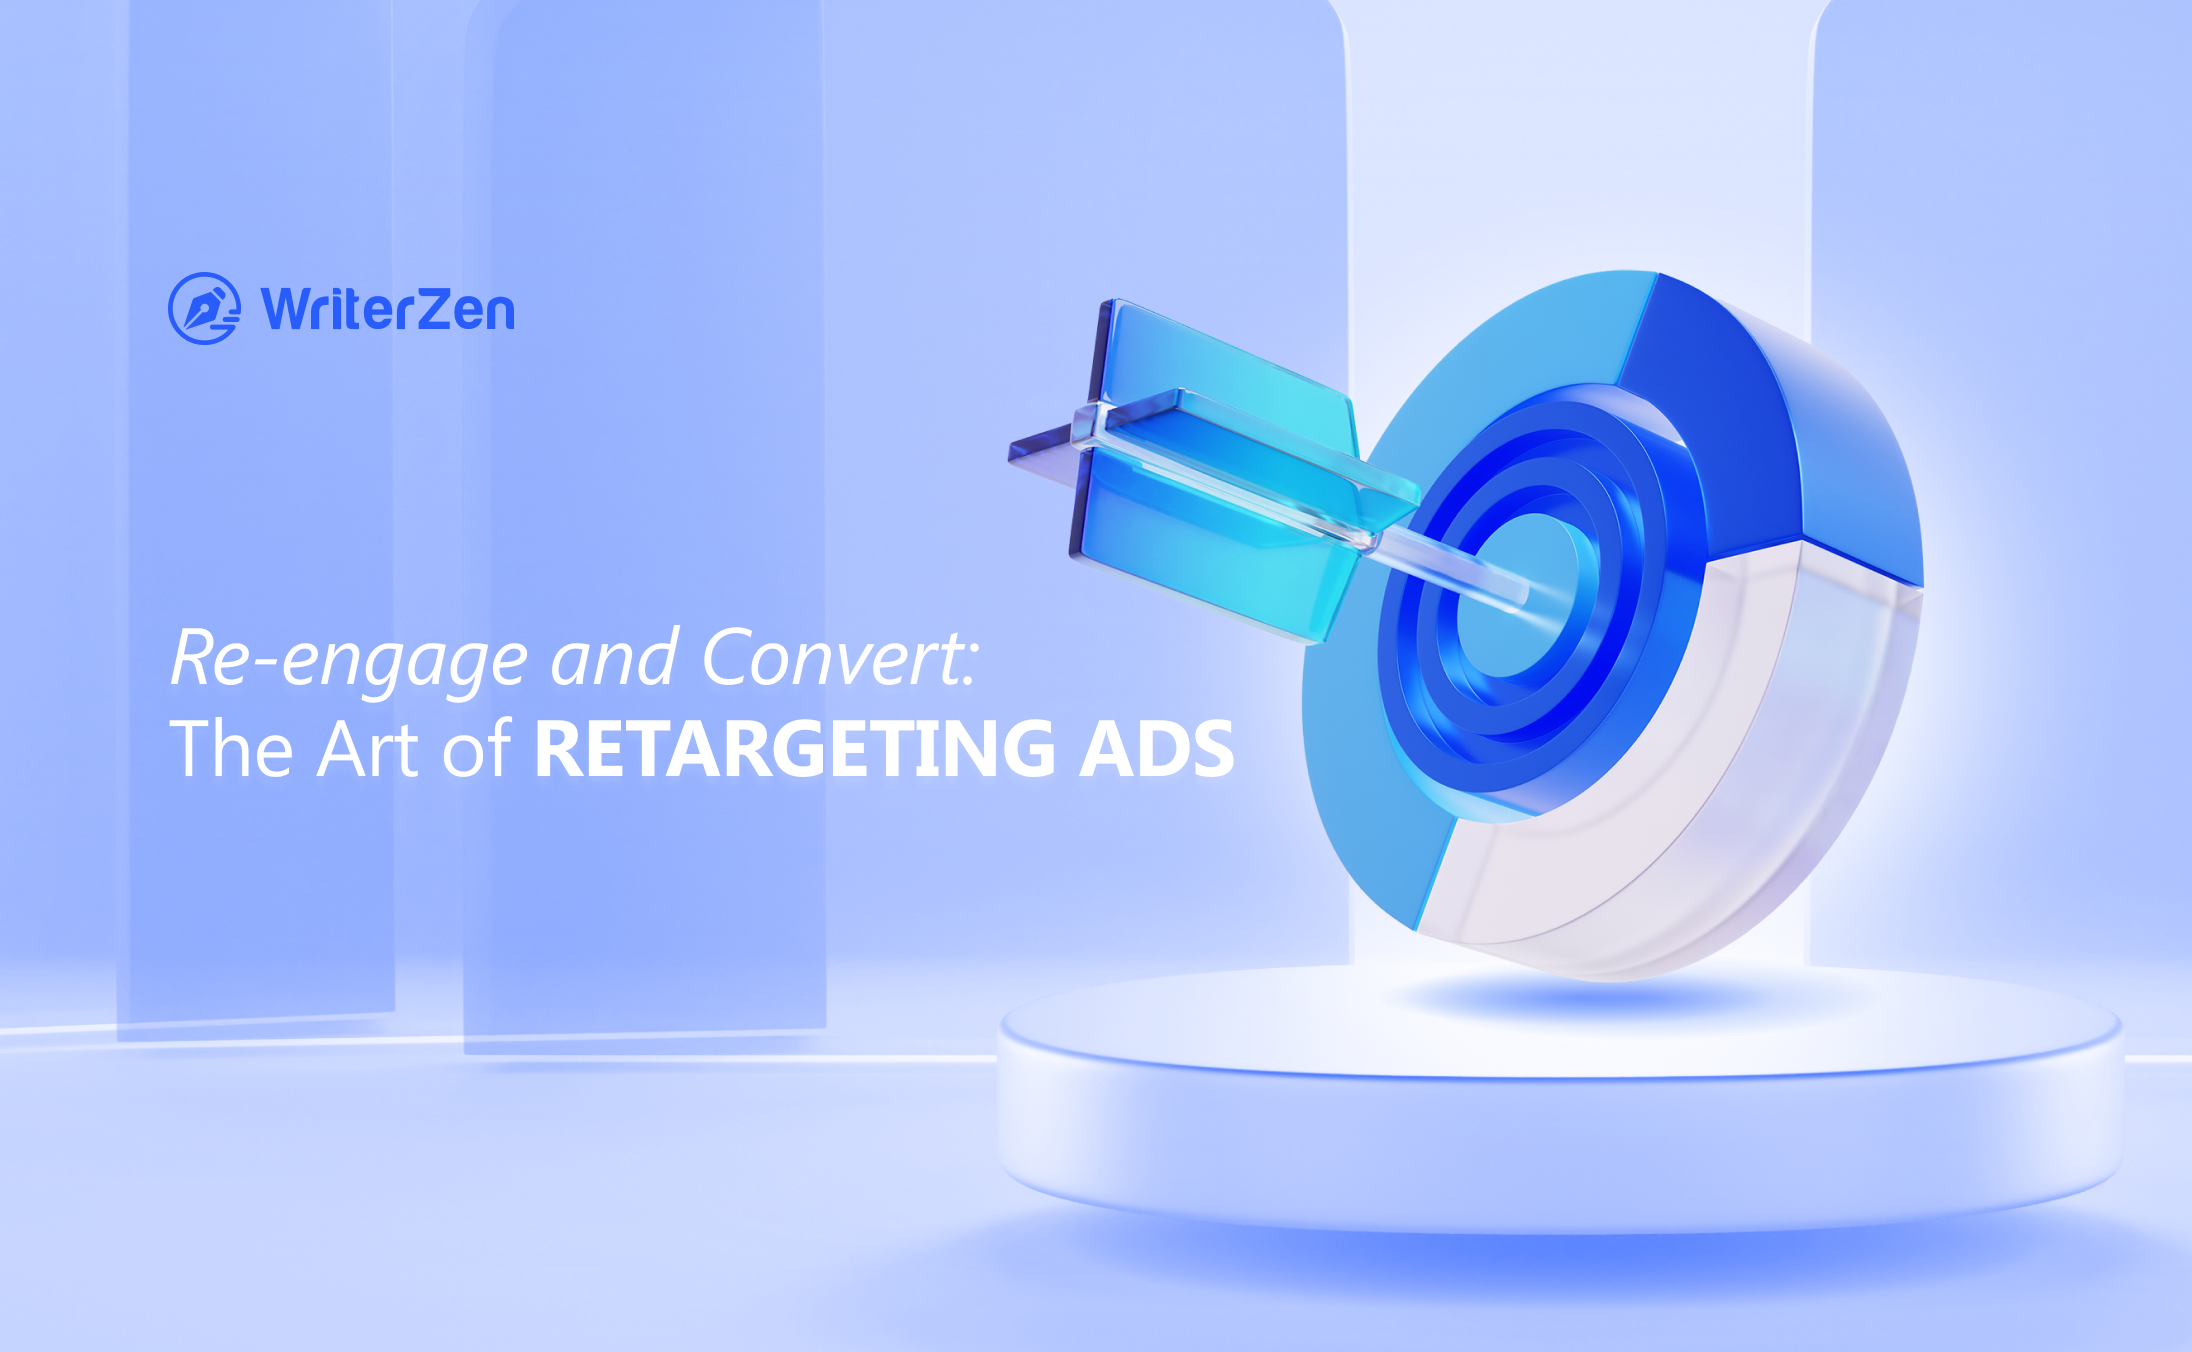 Re-engage and Convert: The Art of Retargeting Ads